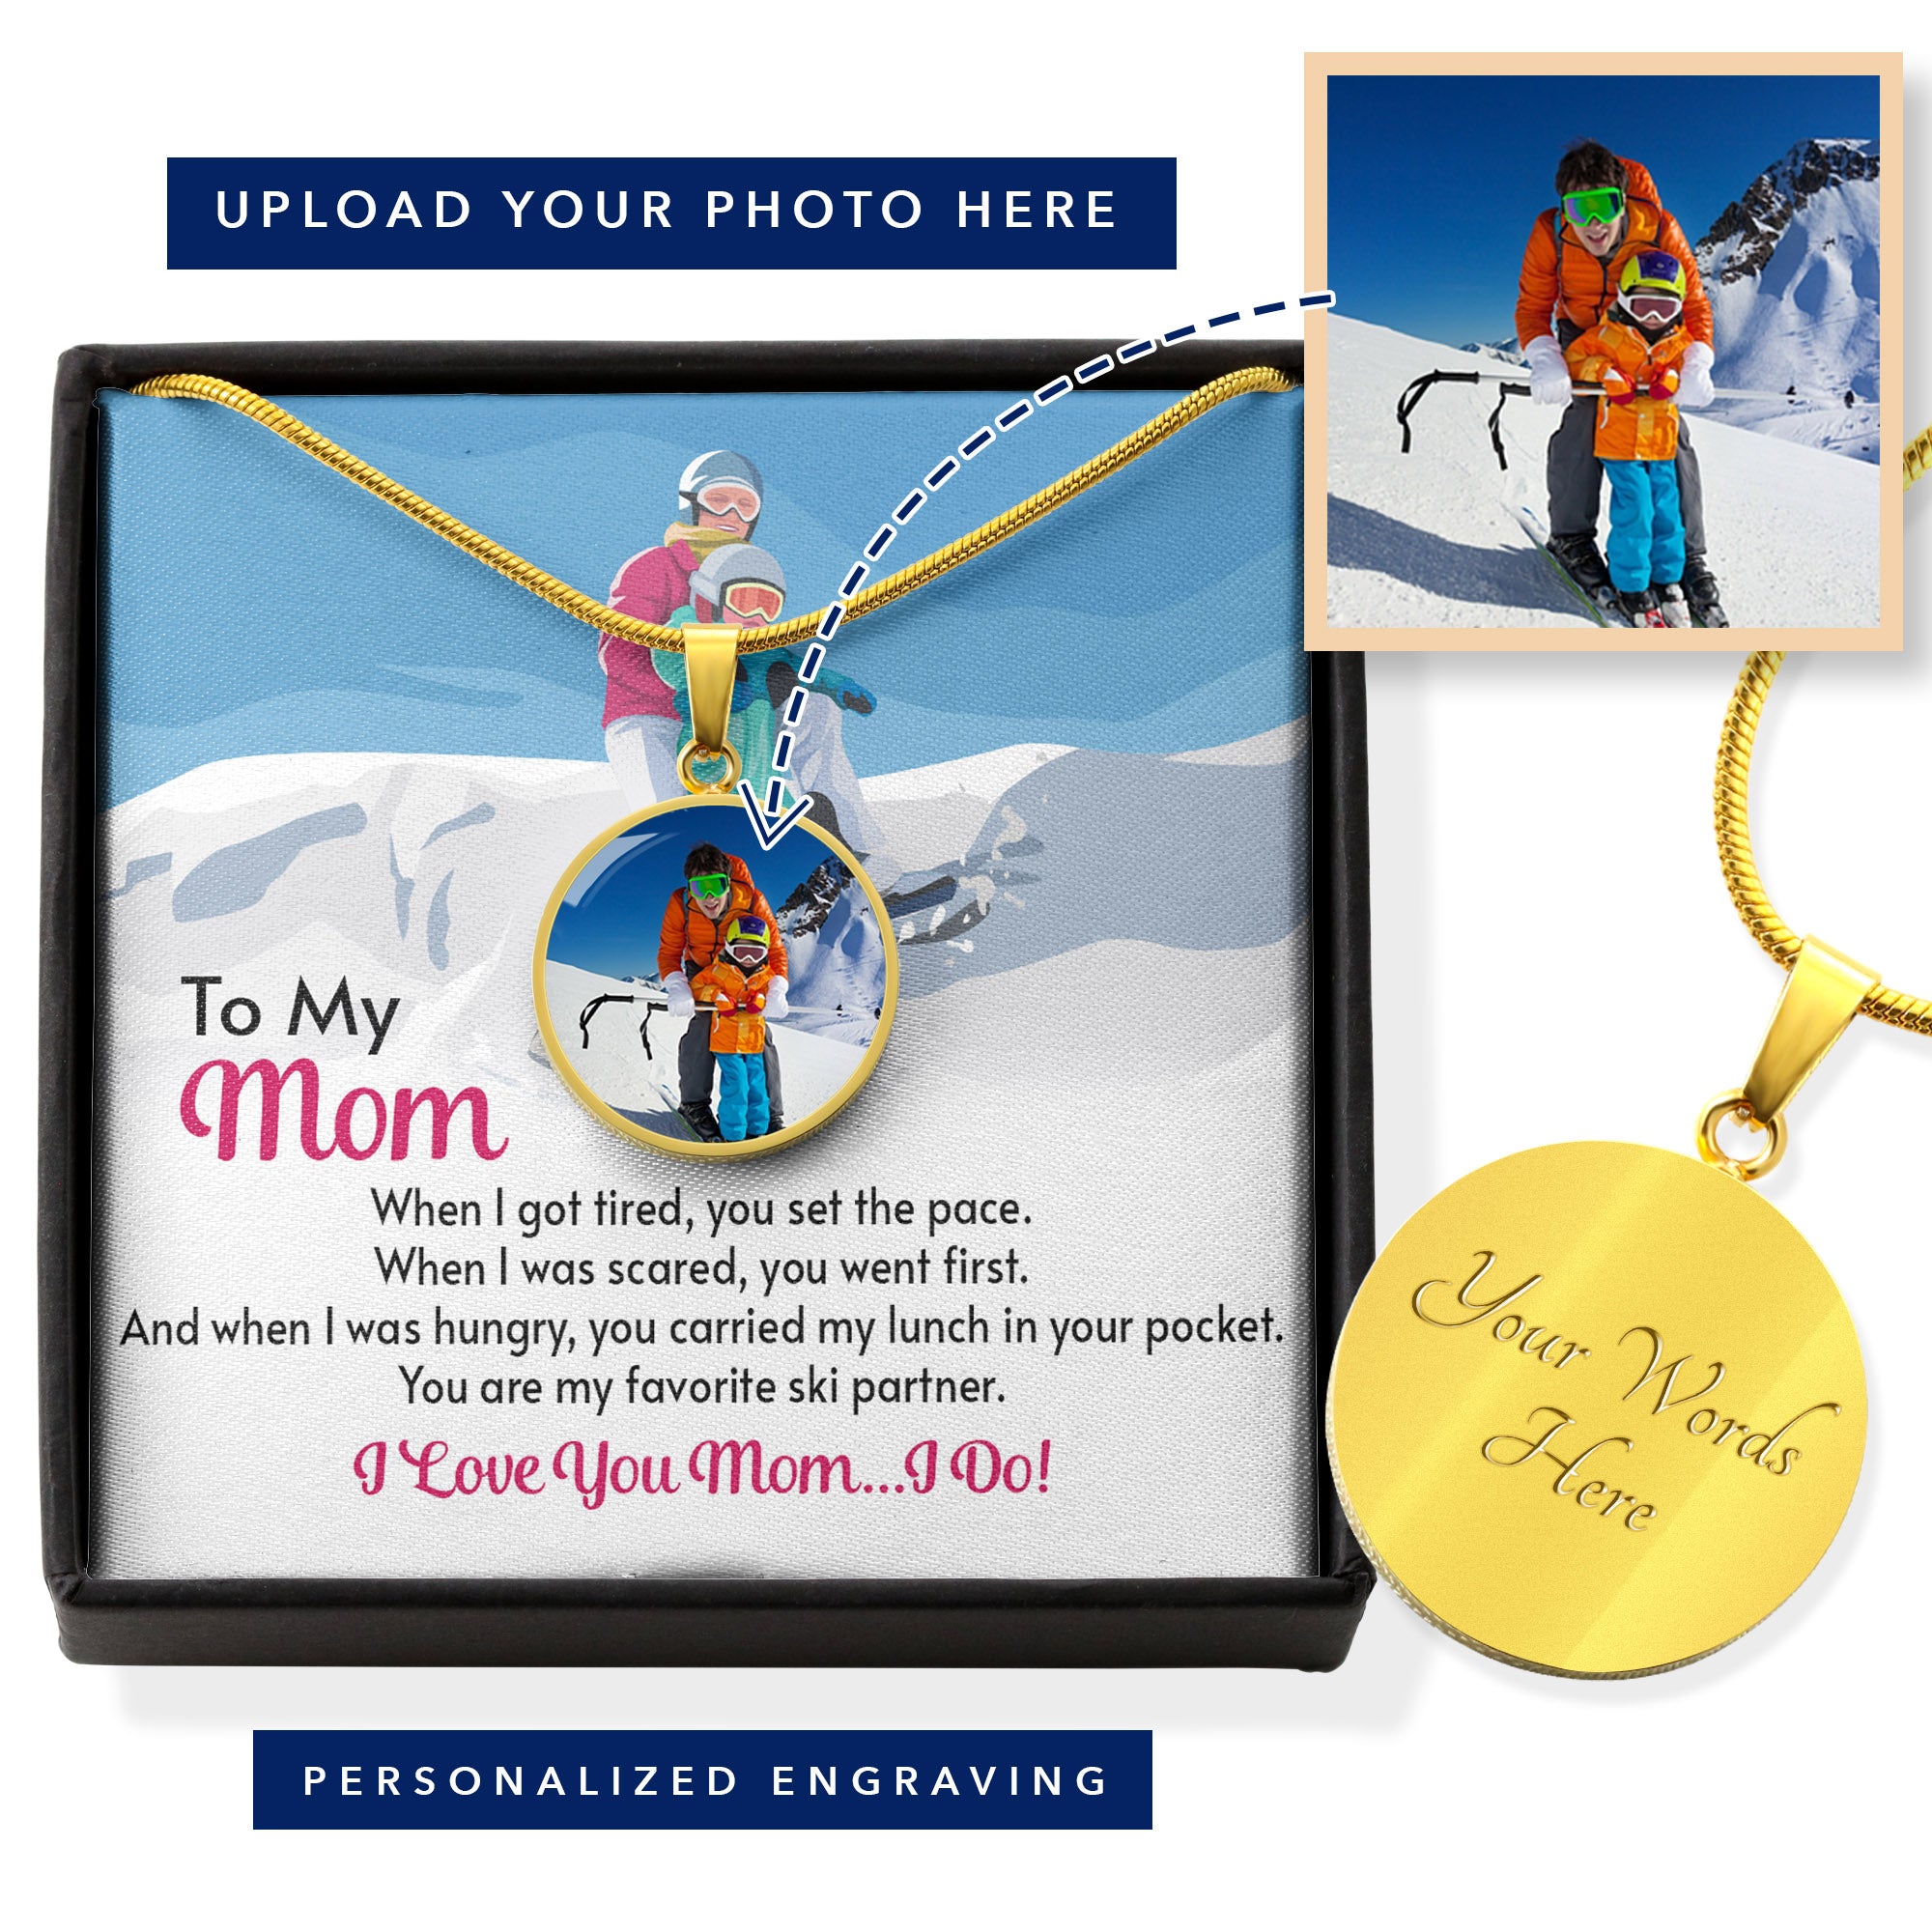 PERSONALIZED Photo Pendant for Moms: When I Got Tired, You Set The Pace - Powderaddicts